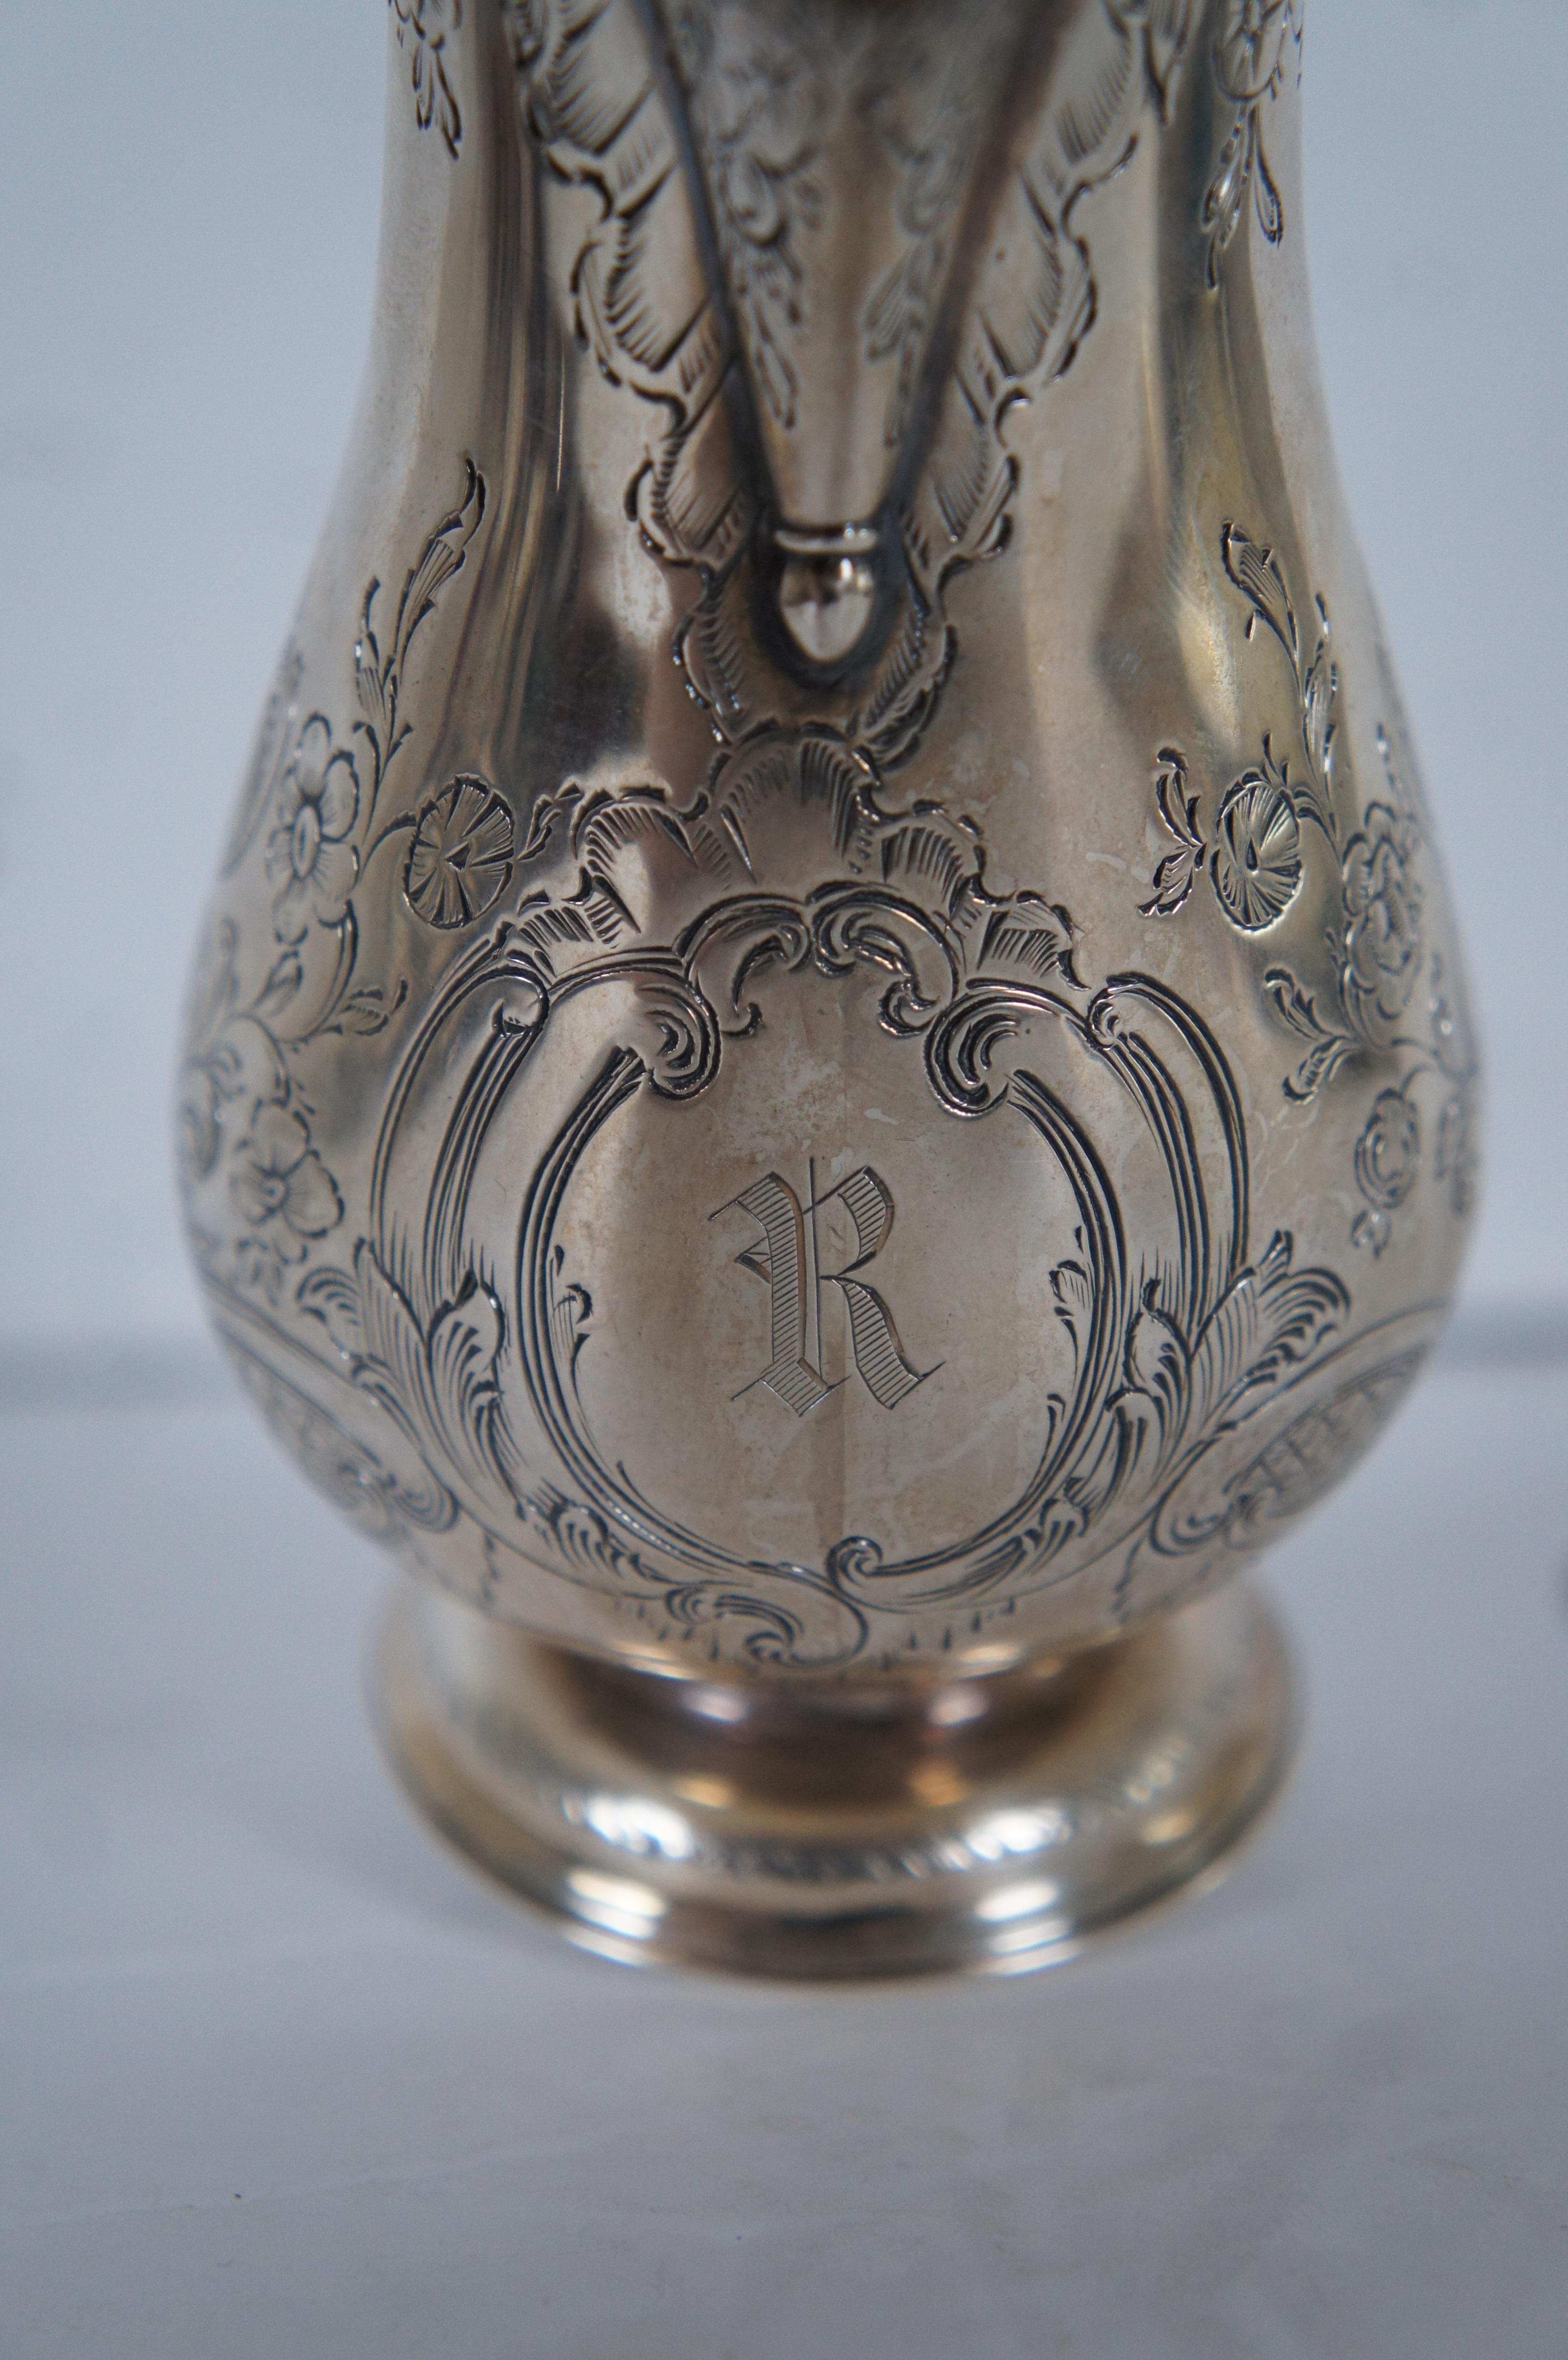 Antique 1851 George Frederick Pinnell Sterling Silver Etched Cream Pitcher 186g In Good Condition For Sale In Dayton, OH